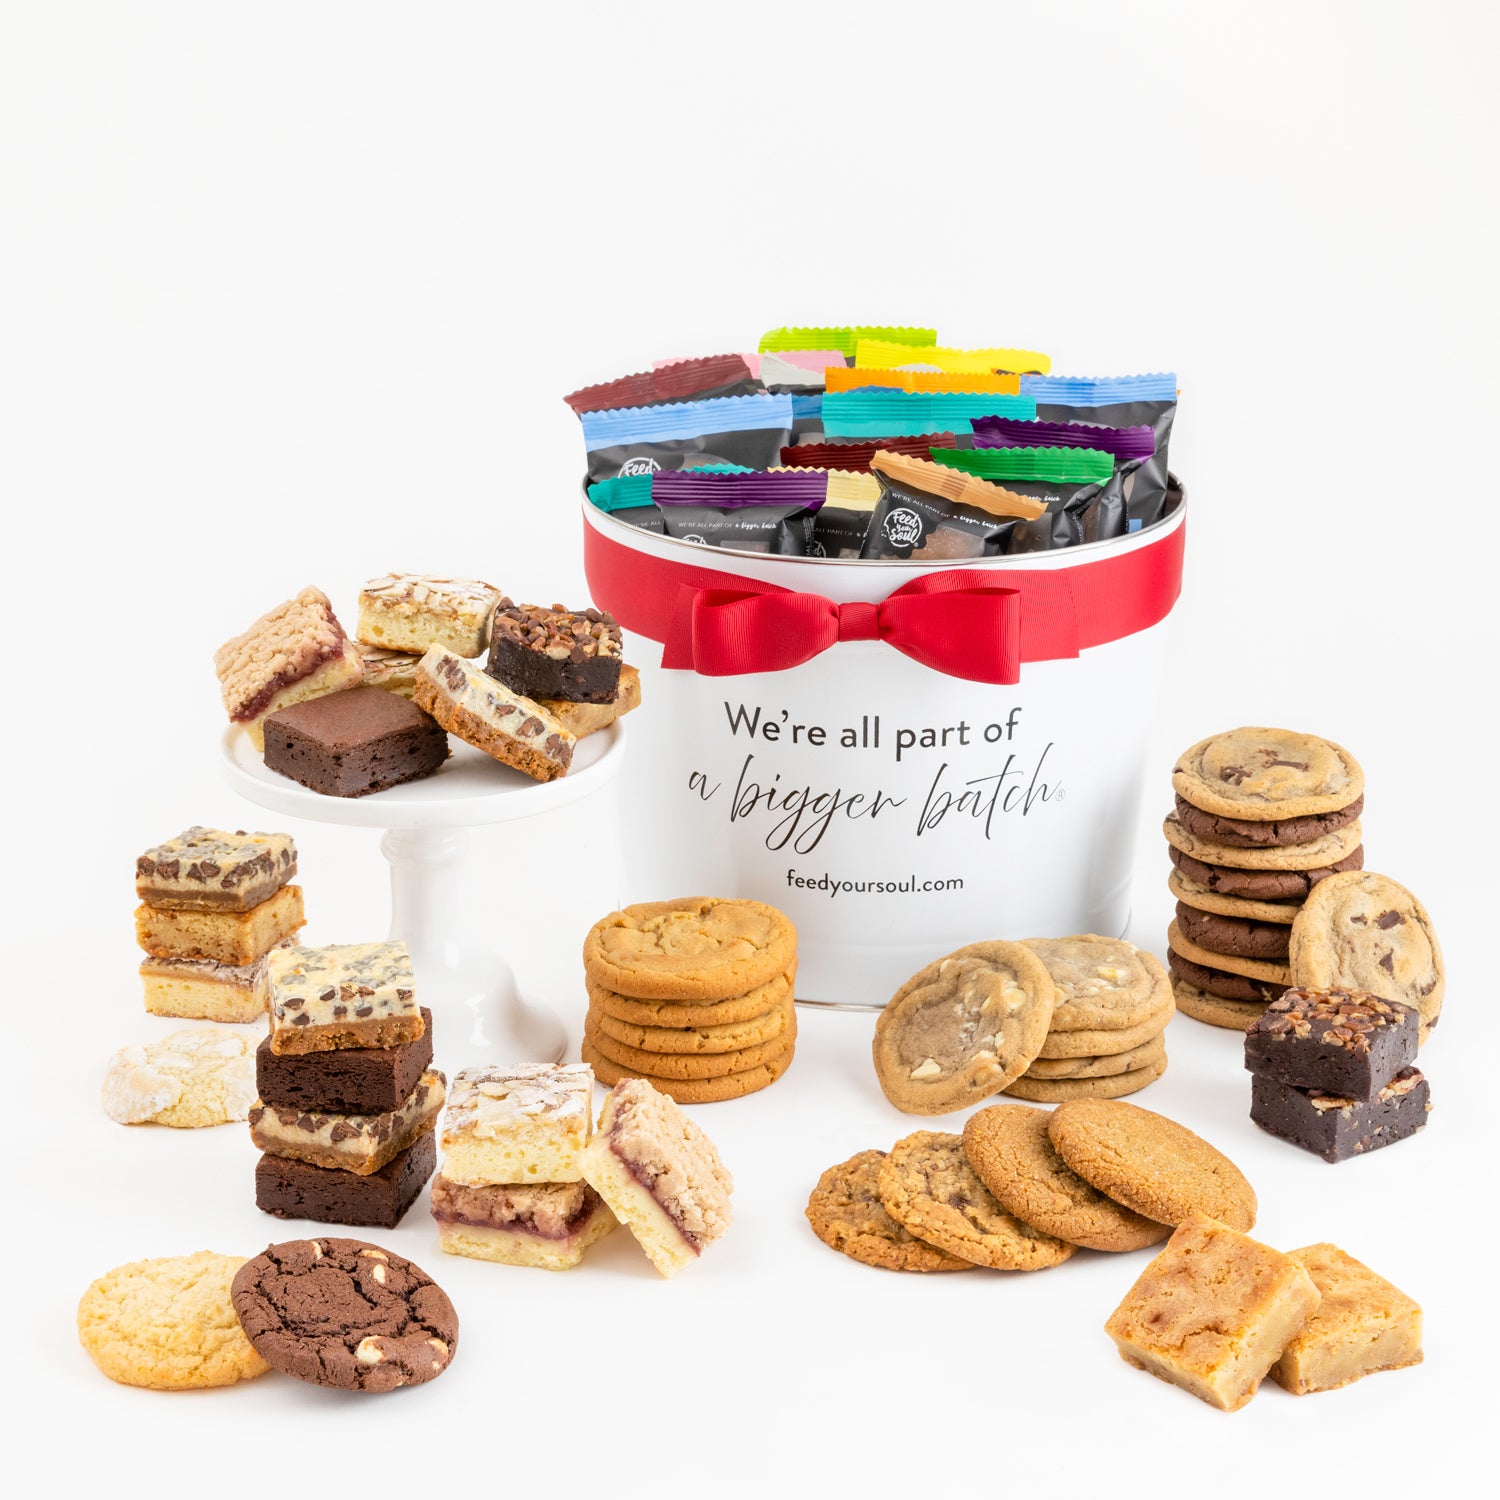 Corporate Gifting: Baked Goods From Feed Your Soul